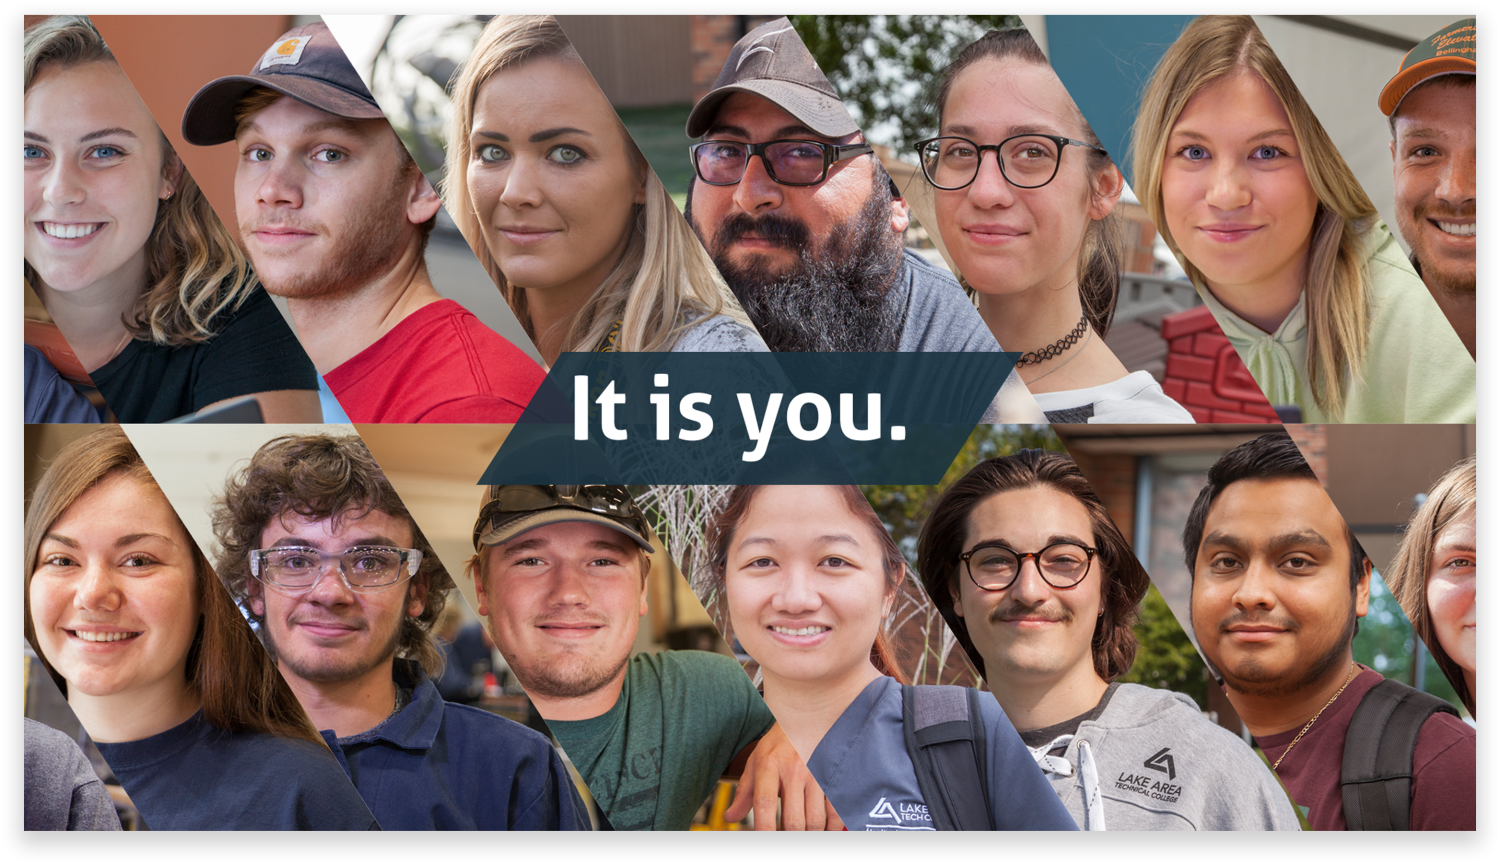 Lake Area Technical College Brand - It is You | Insight Marketing Design Brand Stories